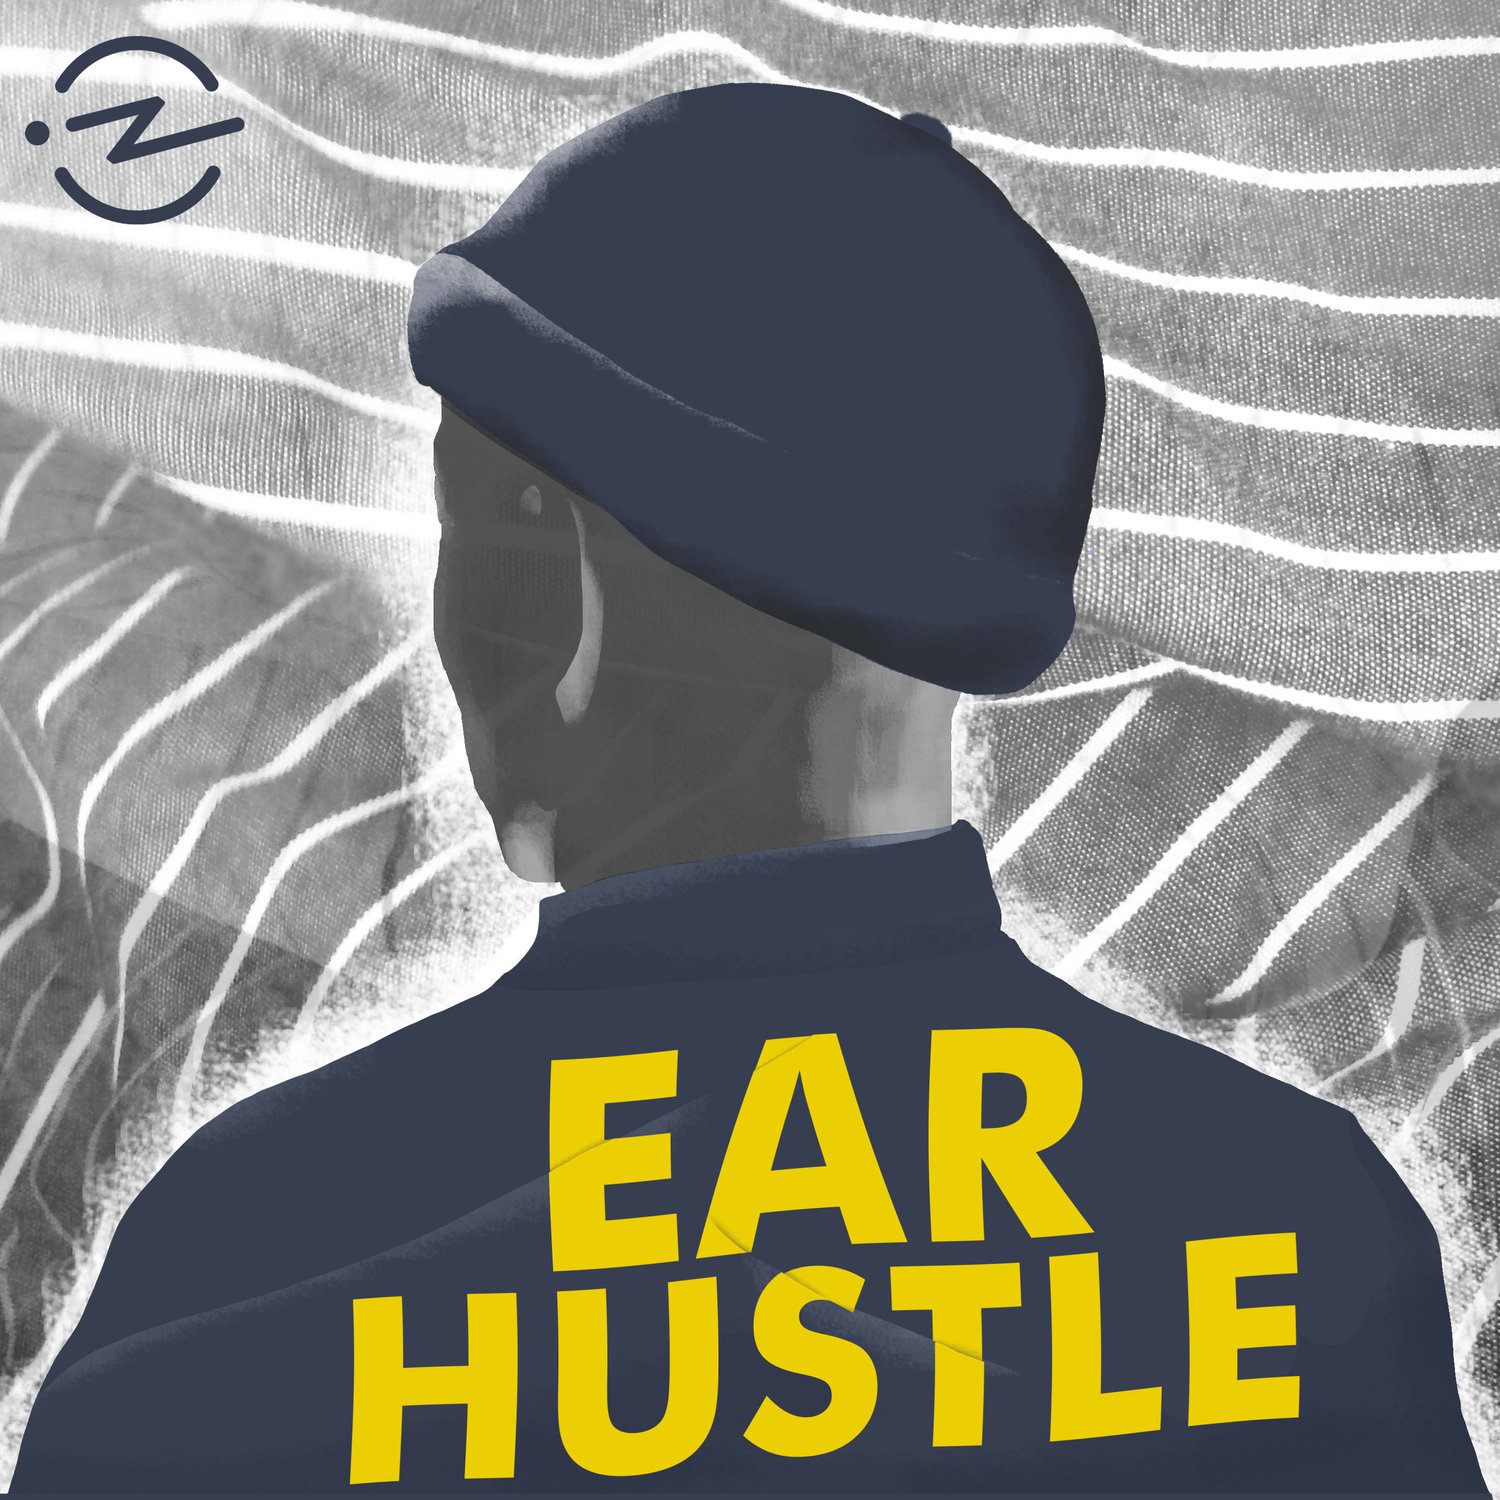 Silhouette of a person with a hat against a wavy line pattern background with the words 'ear hustle' in bold letters.